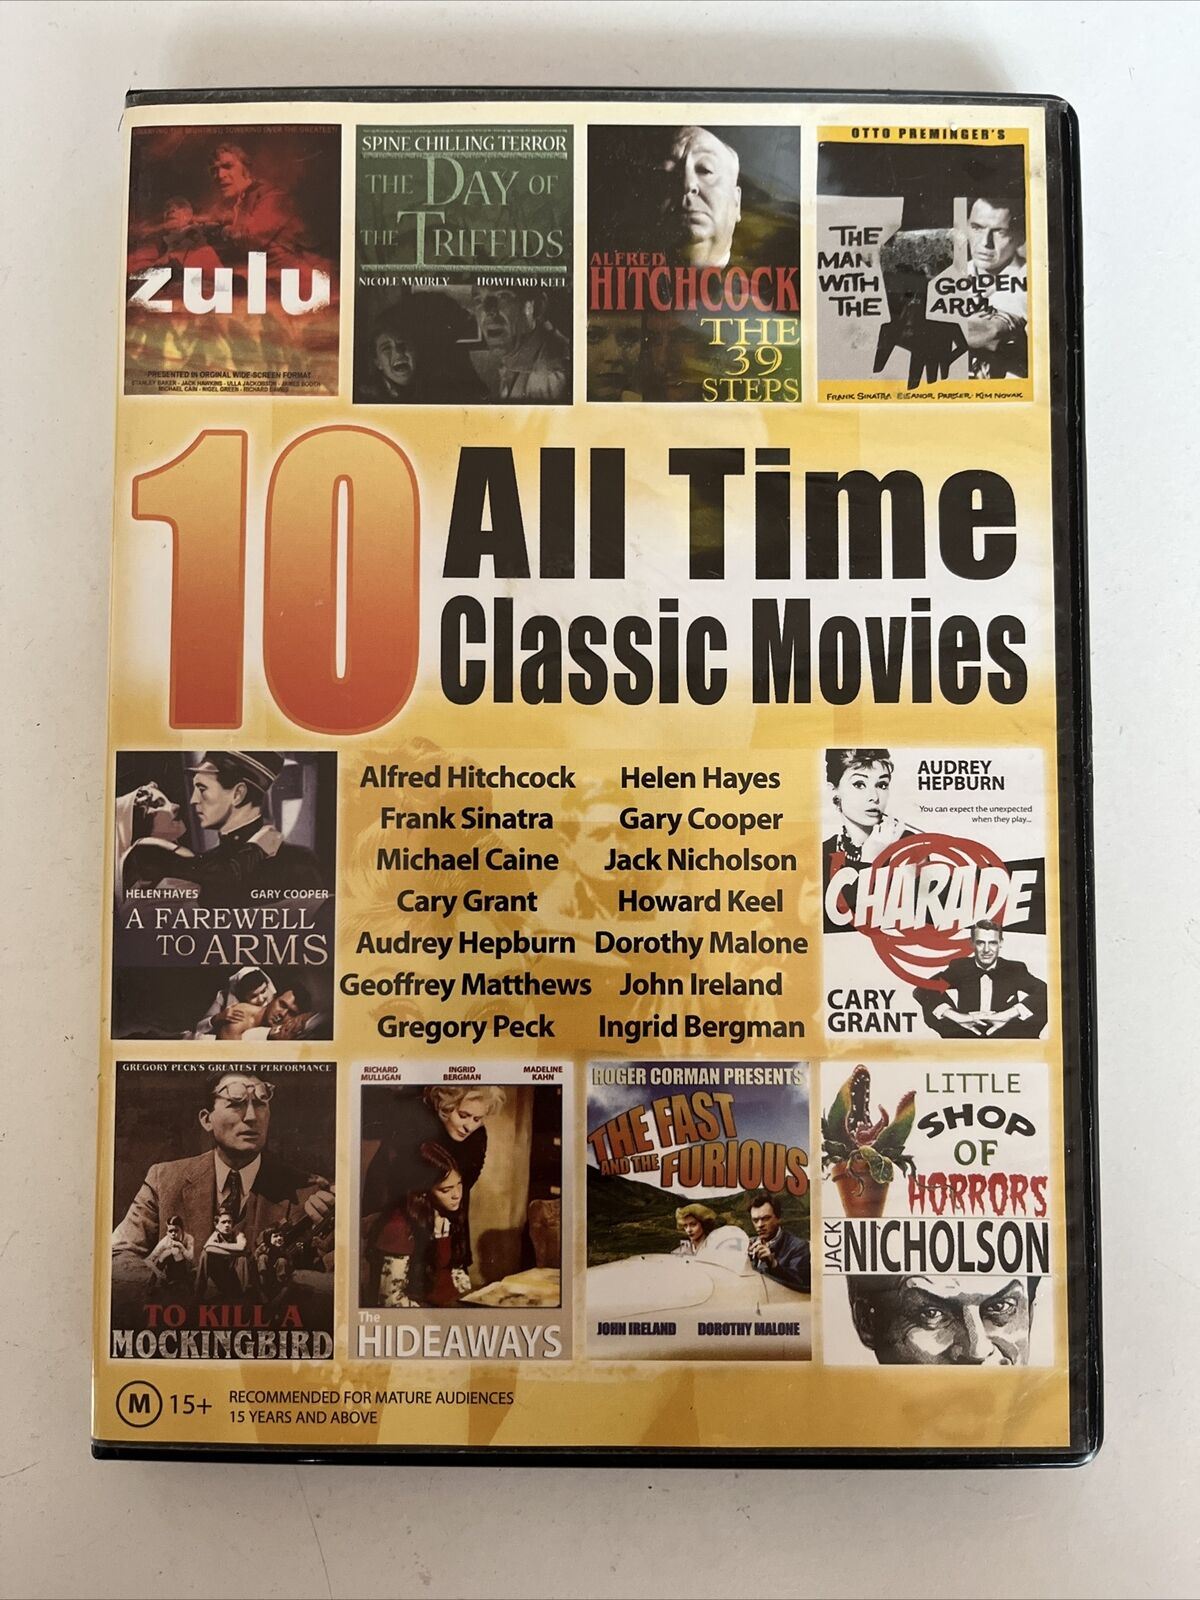 10 All Time Classic Movies (DVD) The 39 Steps, Zulu, Little Shop of Horrors...